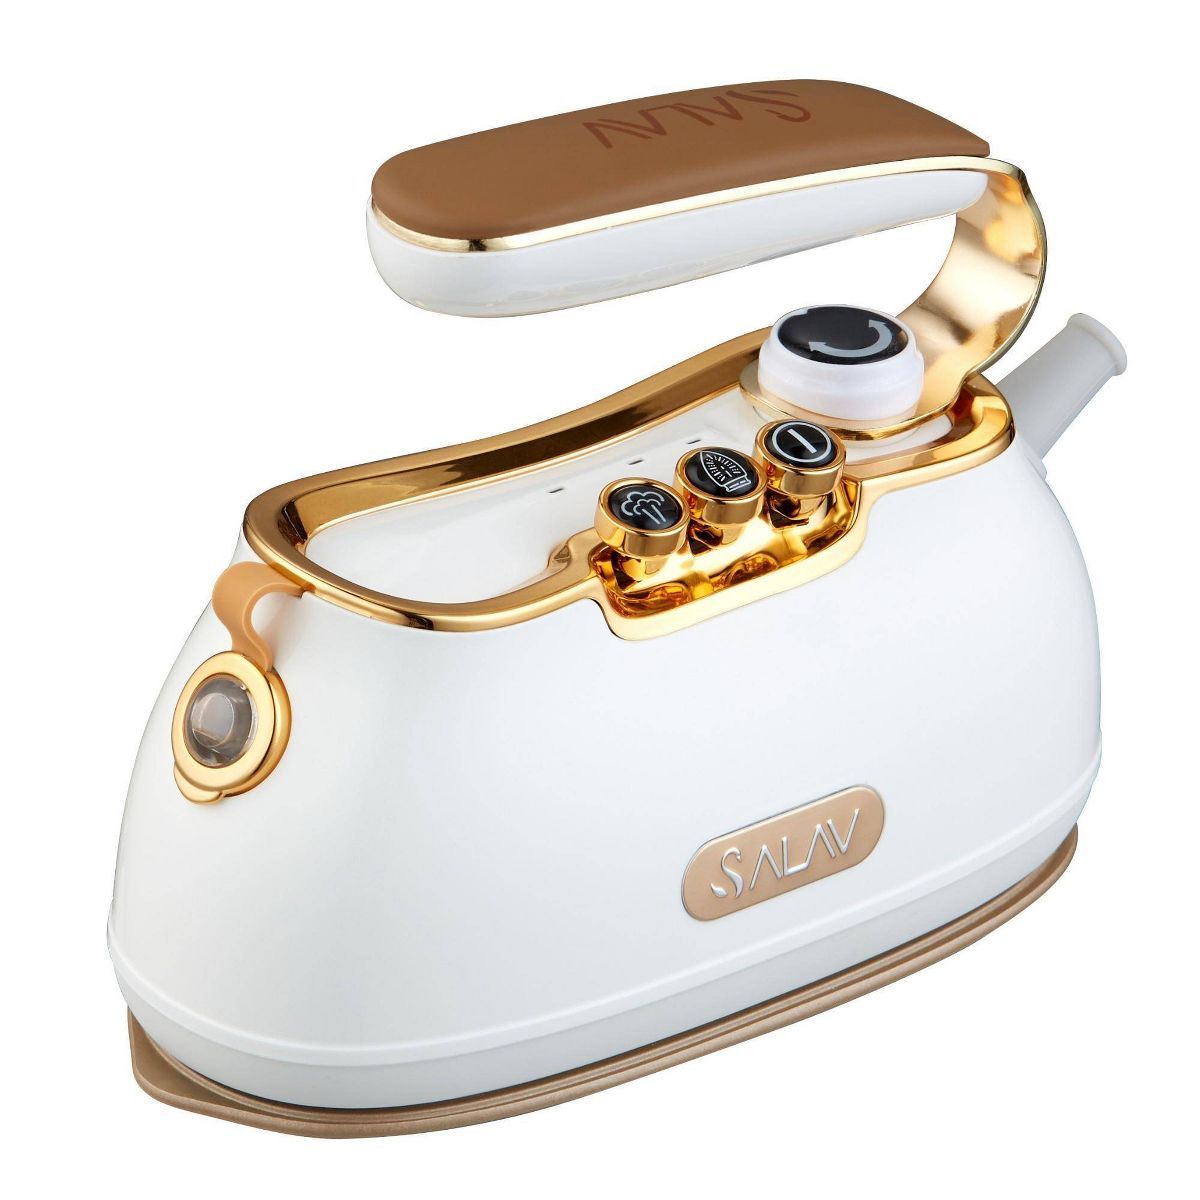 SALAV IS-900 Retro Edition Duopress Steamer and Iron Pearl | Target